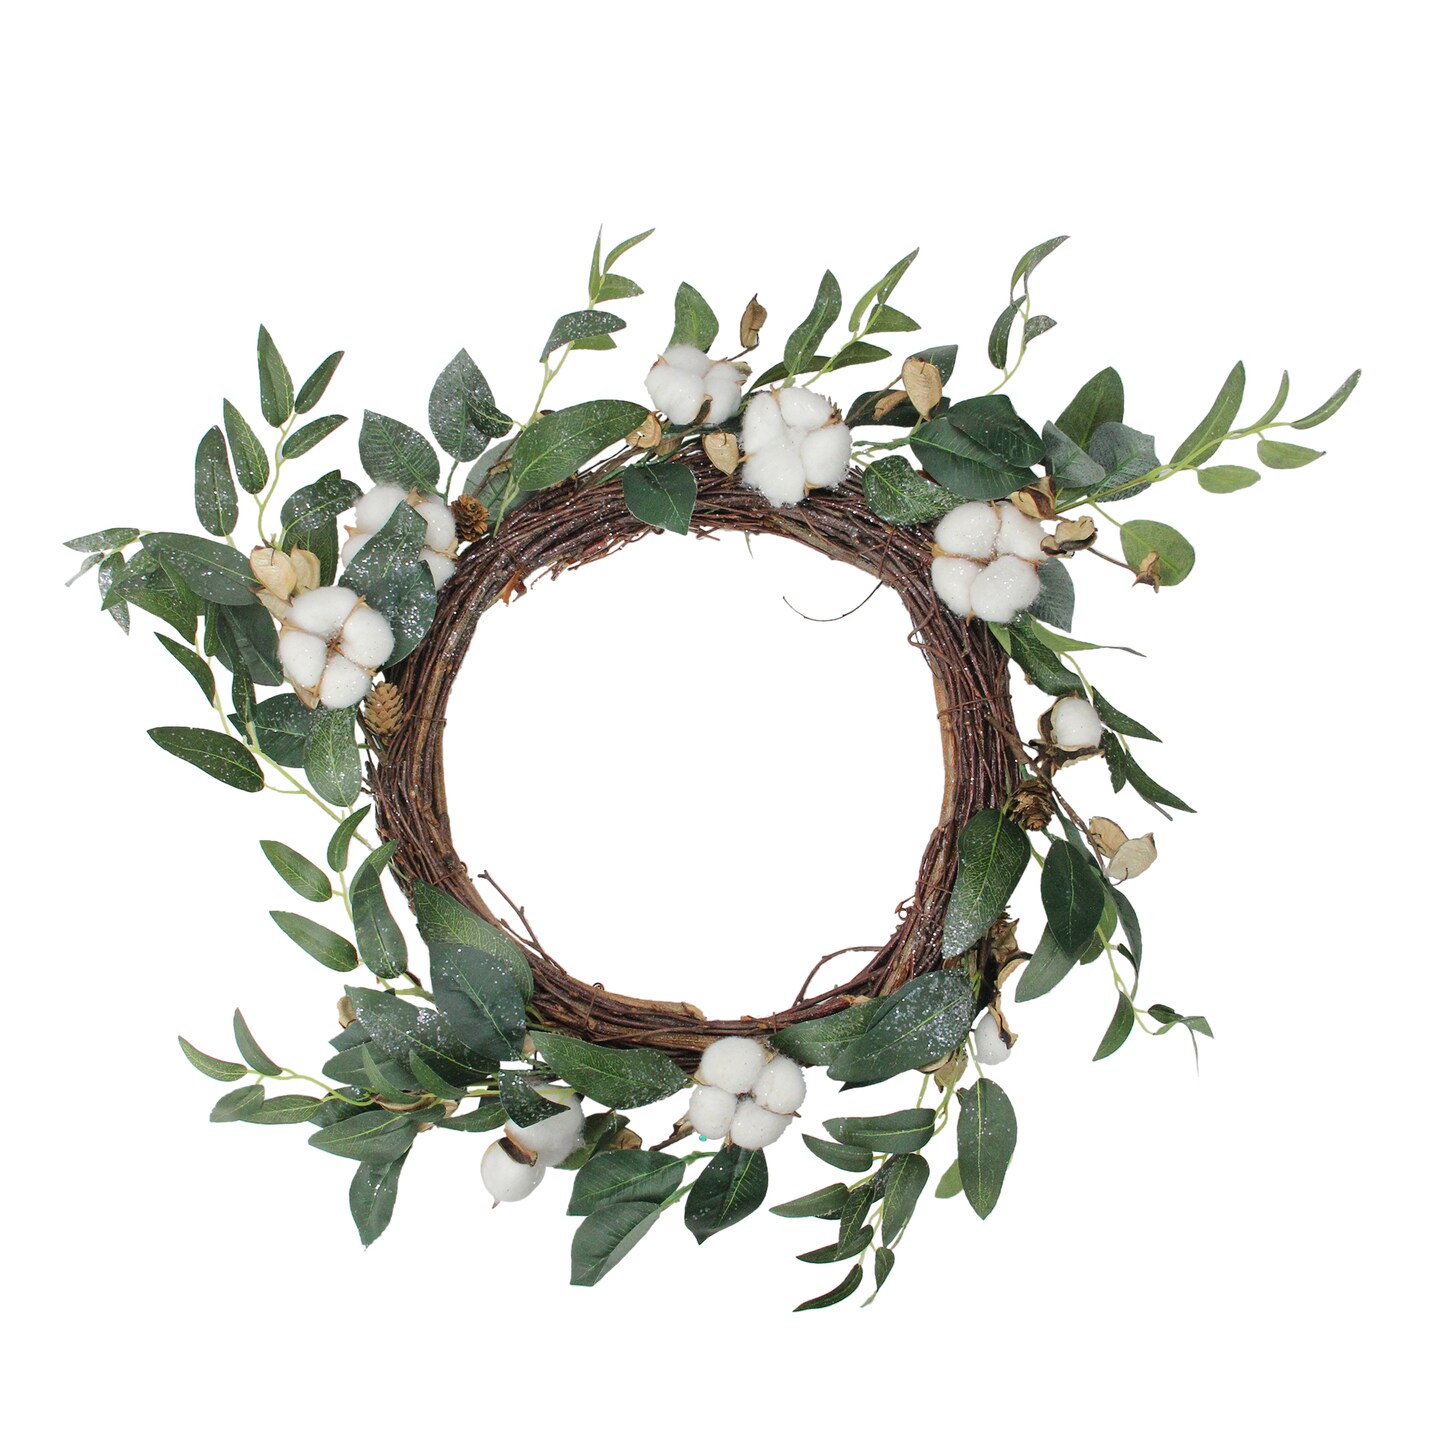 Northlight White Cotton Flowers with Foliage Spring Twig Wreath, 18-Inch, Unlit